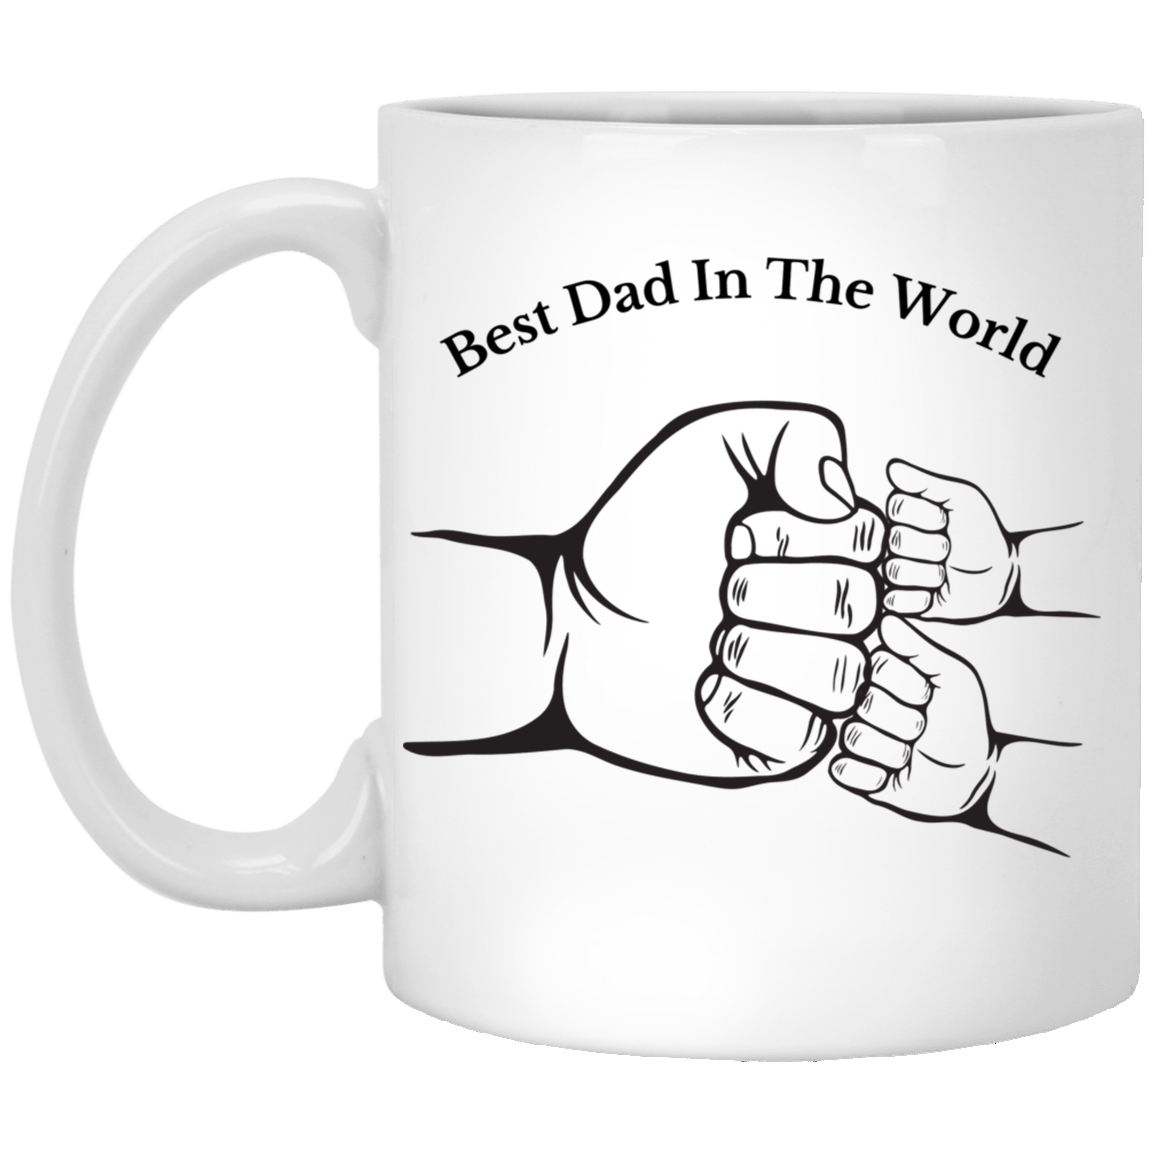 Best Dad In The World, Fist Bump With Two Kids Mug